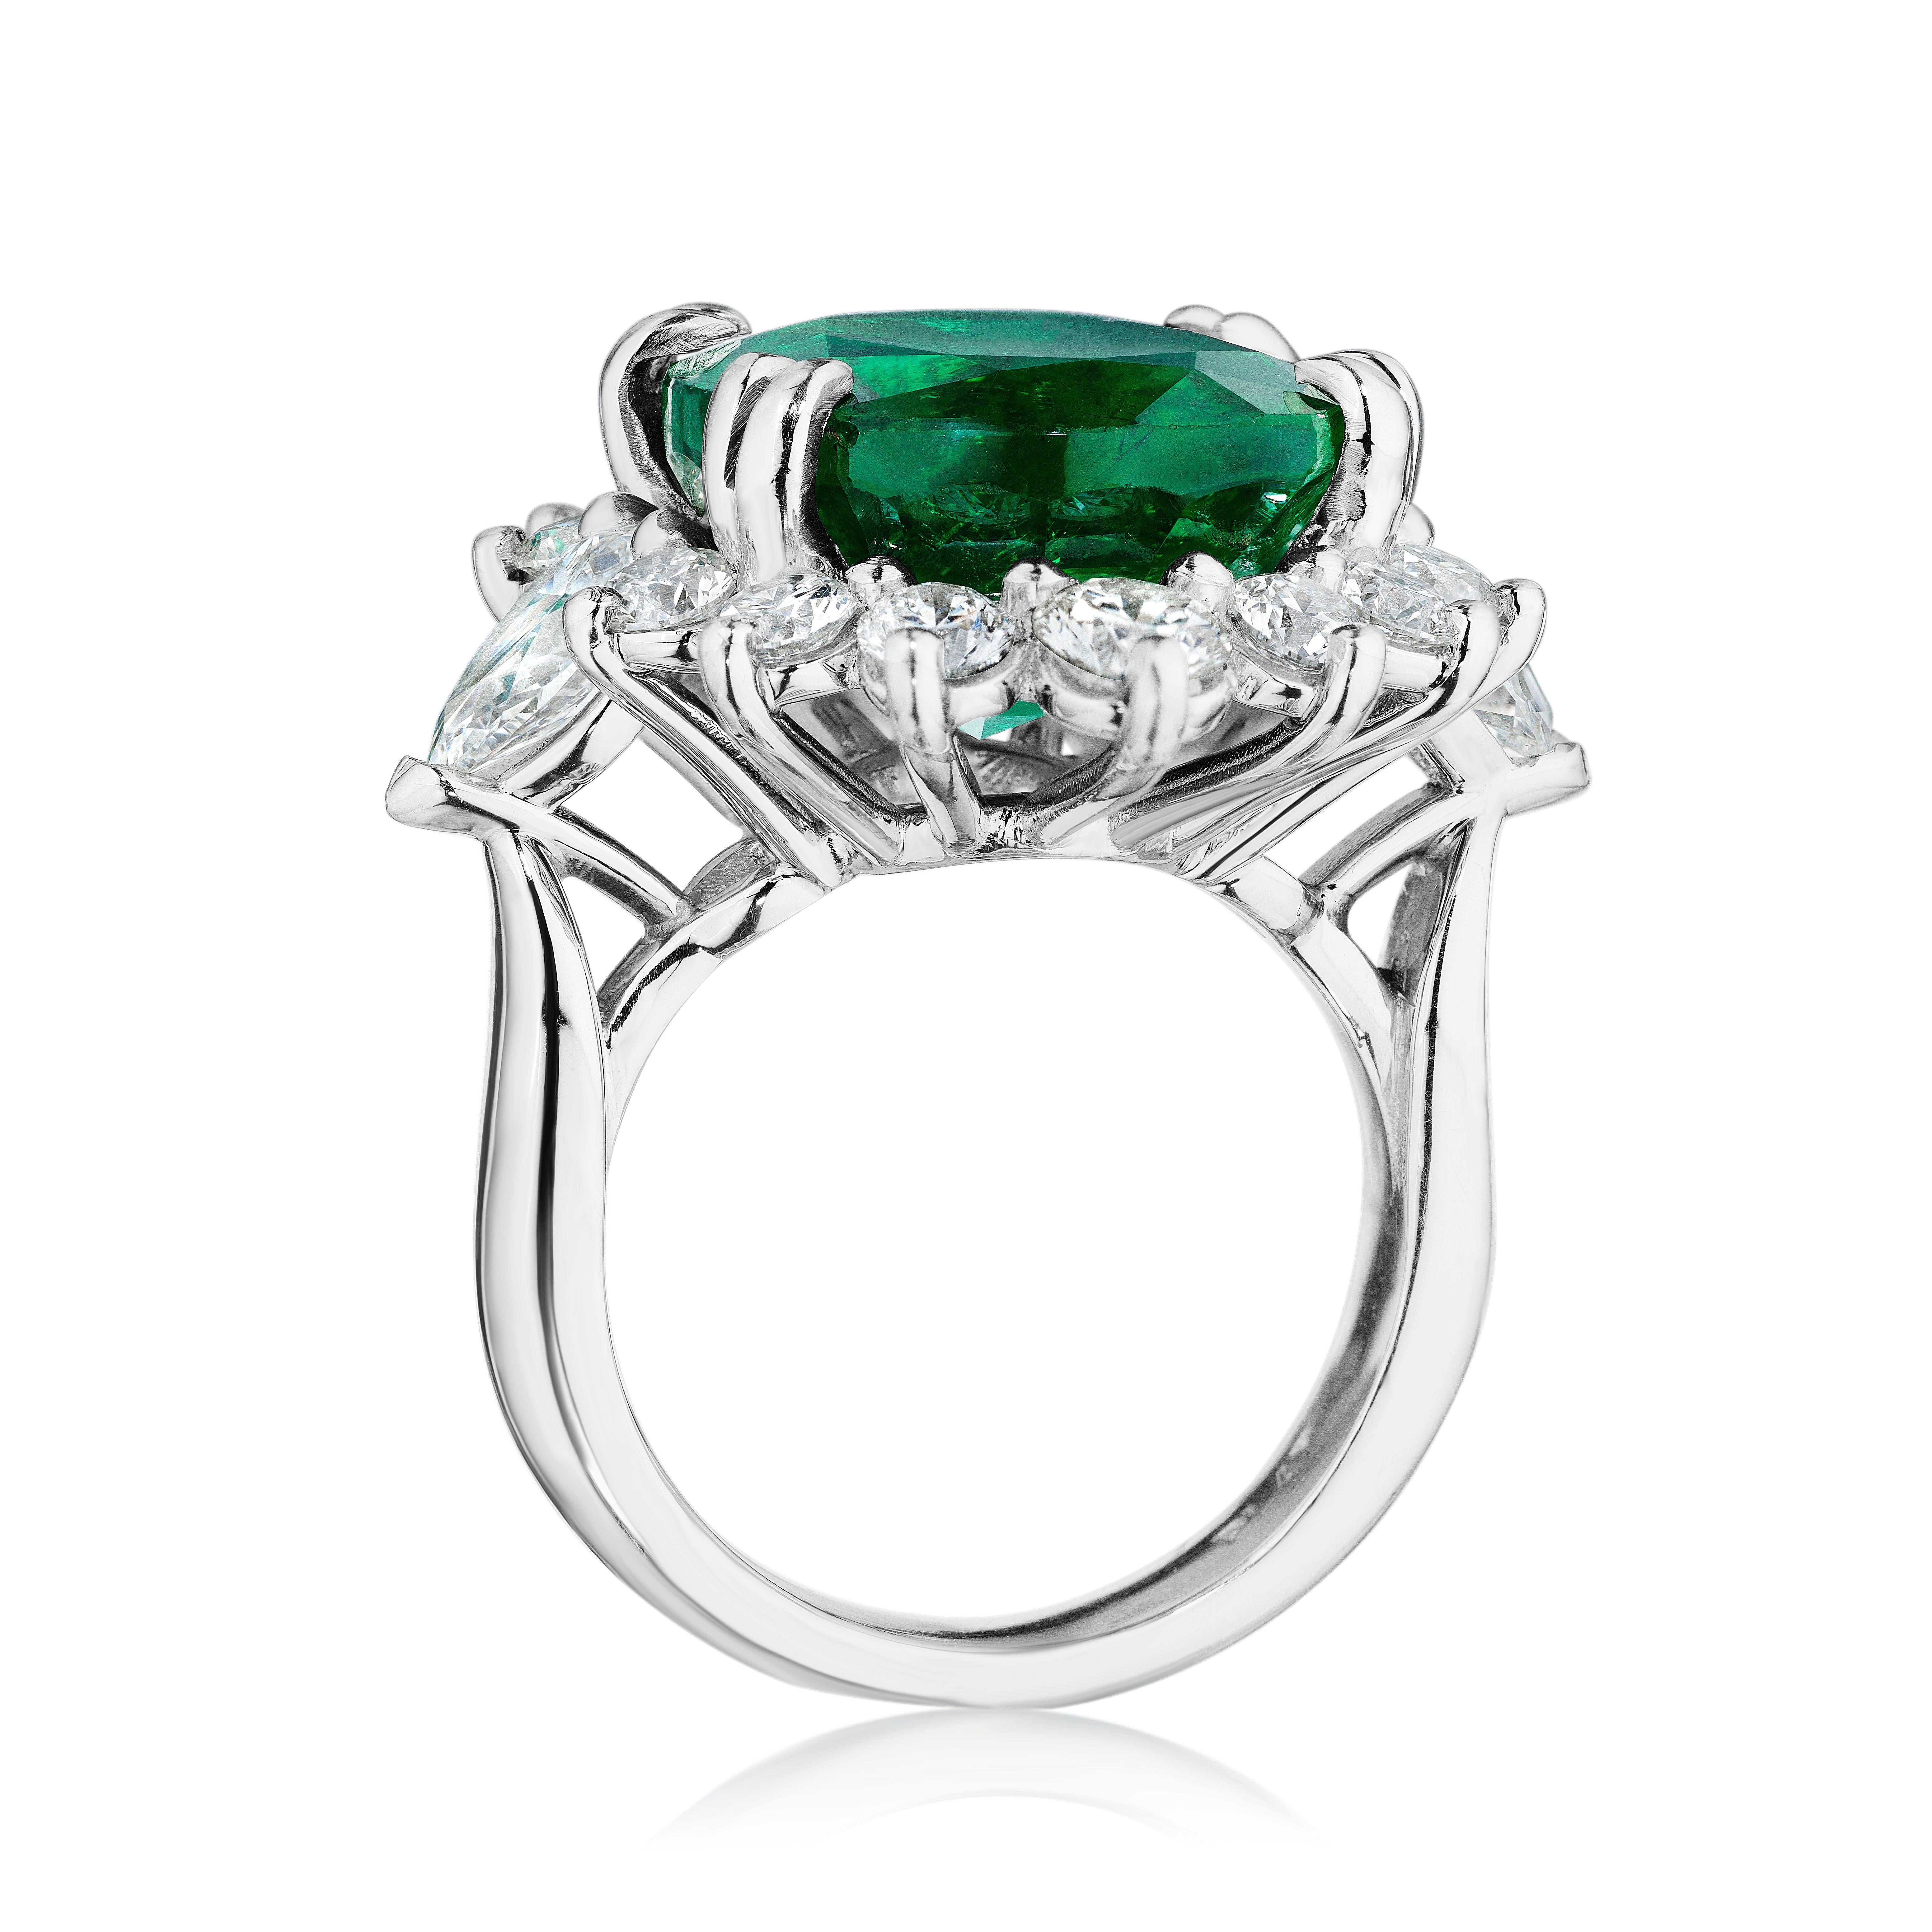 •	Platinum
•	Size 6.50

•	Number of Oval Emeralds: 1
•	Carat Weight: 15.05ctw
•	Color: Vivid Green
•	Minor Enhancement
•	Certificate: GRS, GRS2014-070723

•	Number of Pear Shape Diamonds: 2
•	Carat Weight: 1.40ctw
•	Color: F
•	Clarity: SI1
•	GIA: